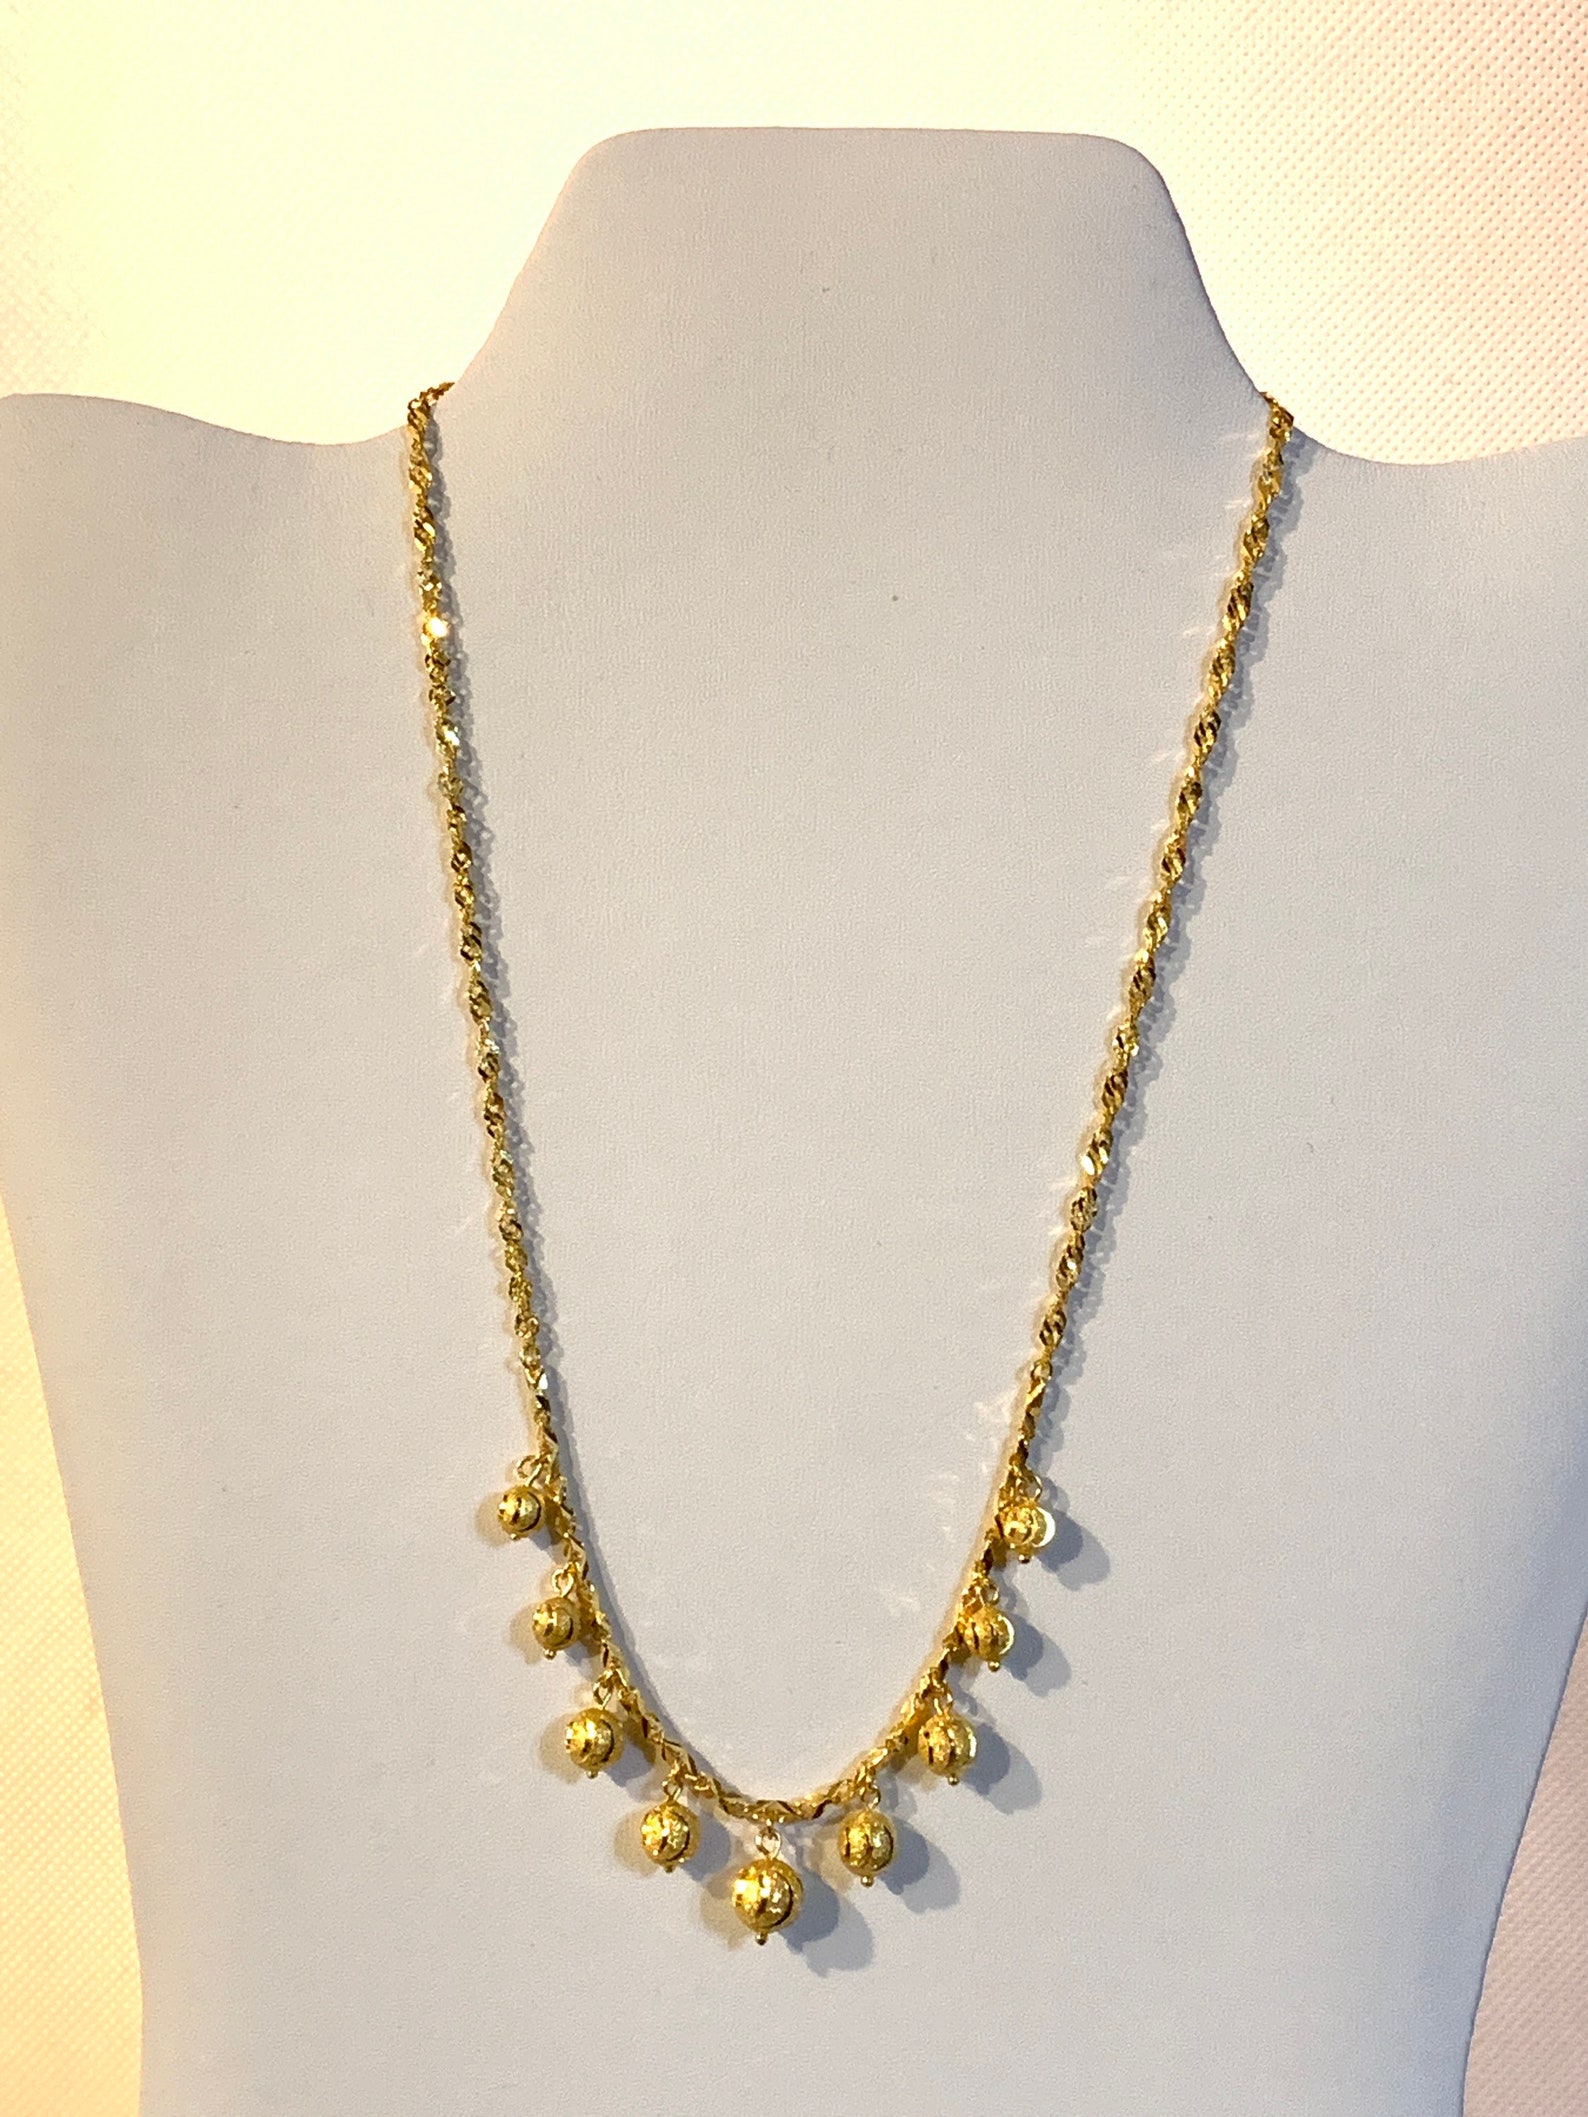 21K Yellow Gold Beaded 17 Necklace / 21K Gold Dangle - Etsy